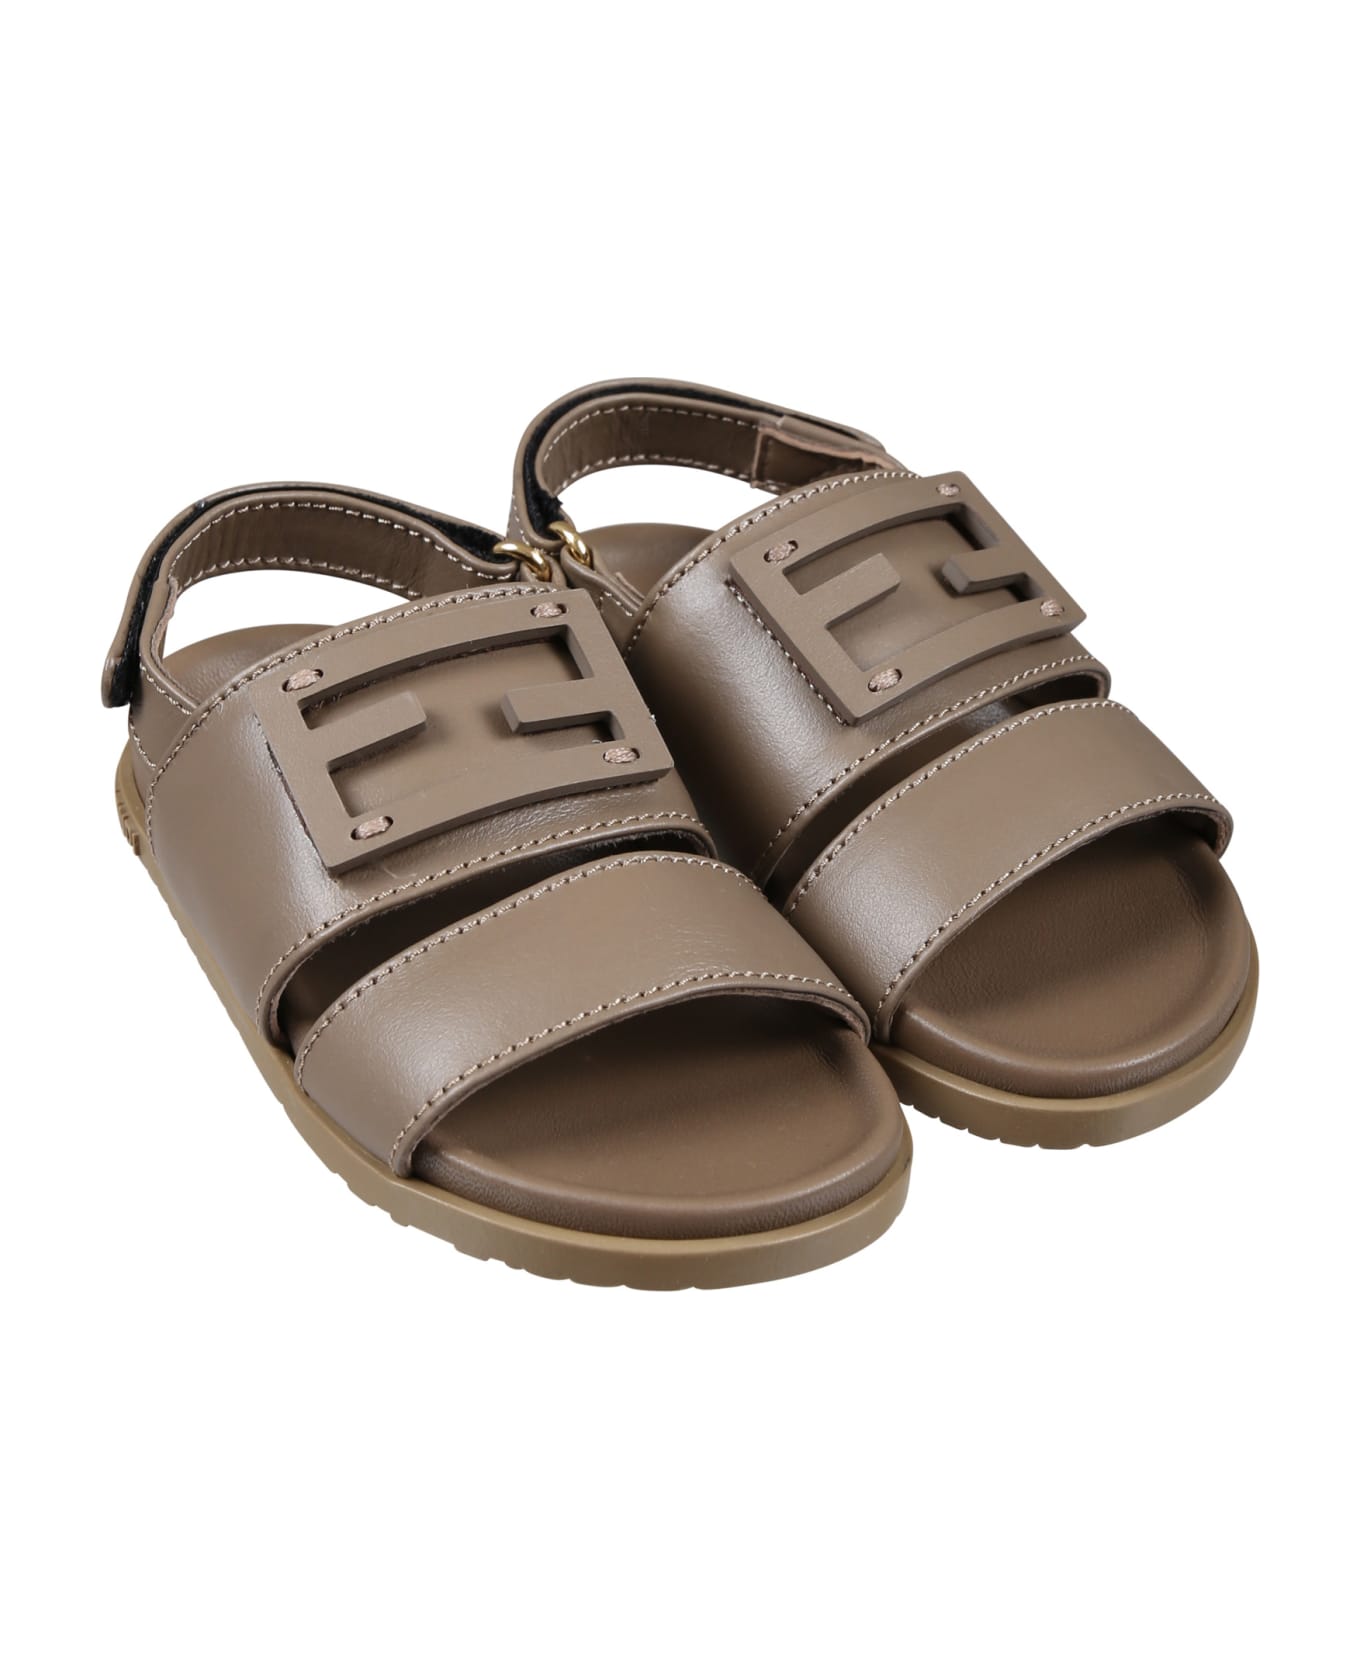 Fendi Brown Sandals For Kids With Ff Logo - Brown シューズ